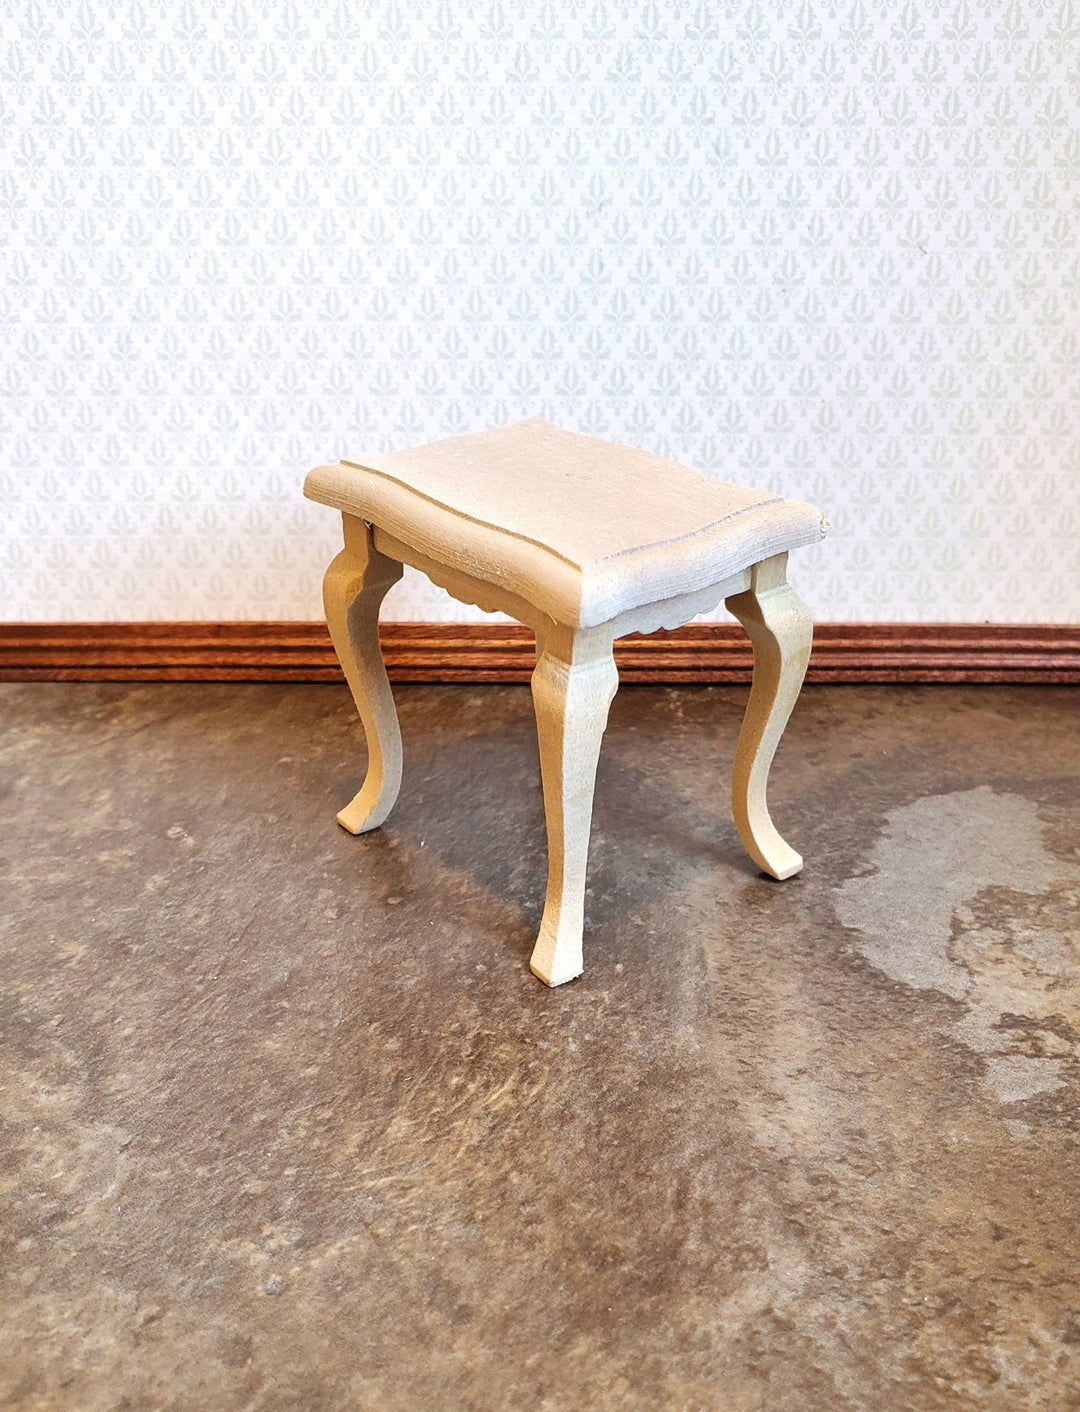 Dollhouse Miniature Side or End Table Curvy Top Fancy 1:12 Scale Furniture Unfinished Wood - Miniature Crush